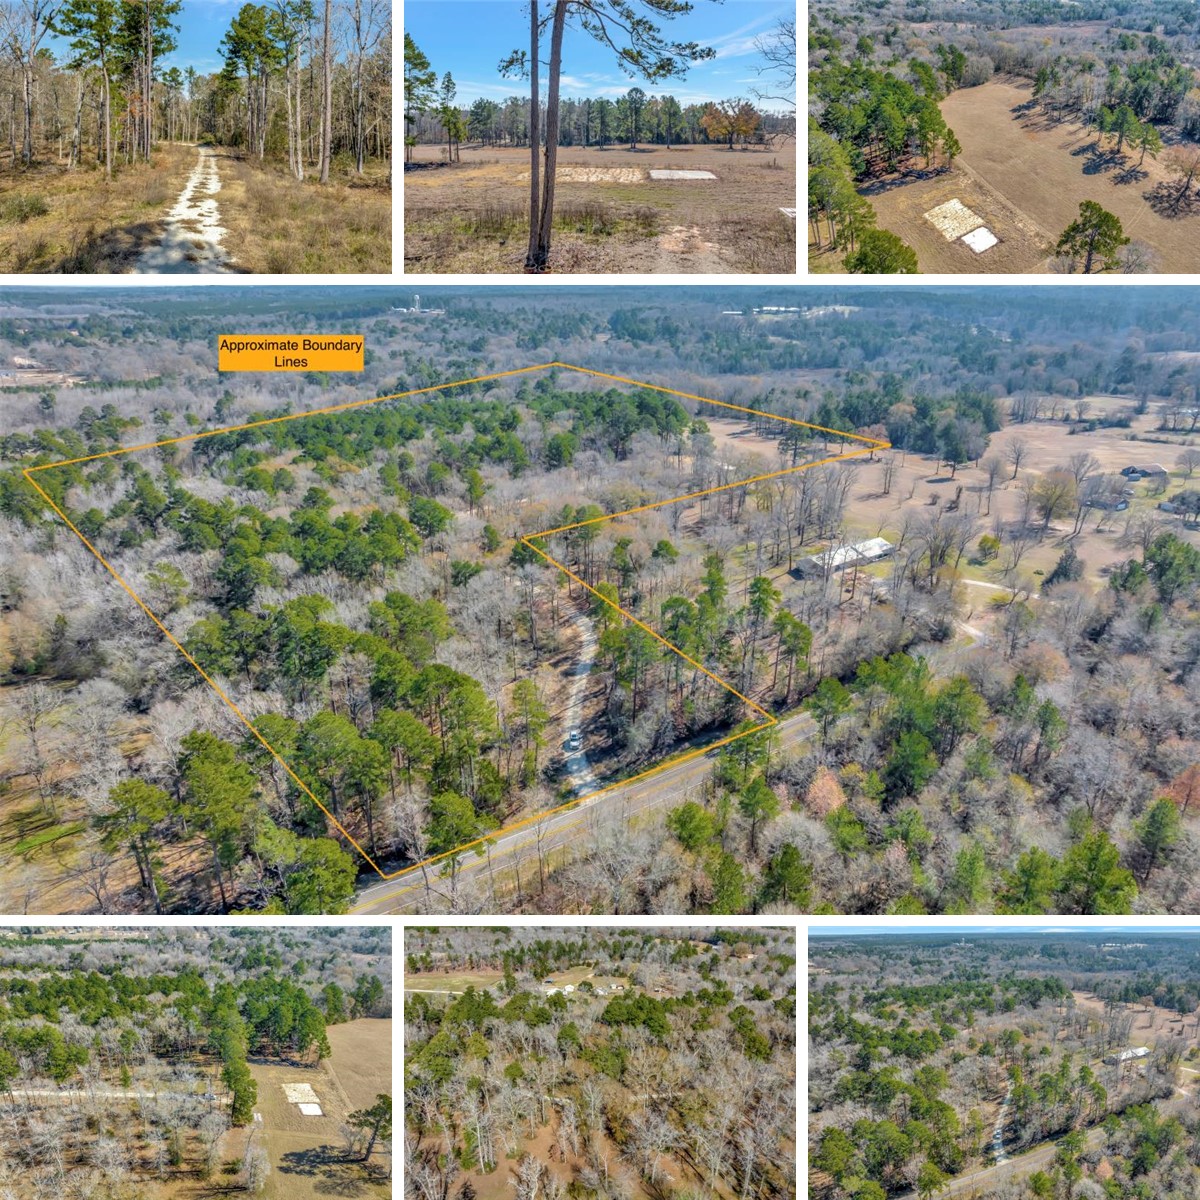 view.360mediaofeasttexas.com/11545-FM-2021
PRICE REDUCED!
11545 FM 2021 Lufkin, TX.
$289,900
22.84 wooded acres with a stream located in the back. See today! 936-414-2174
#lufkinrealestate #realestate #pricereduced #newprice  #land #landforsale #forsale #realtor #broker #cindypiercesellstexas